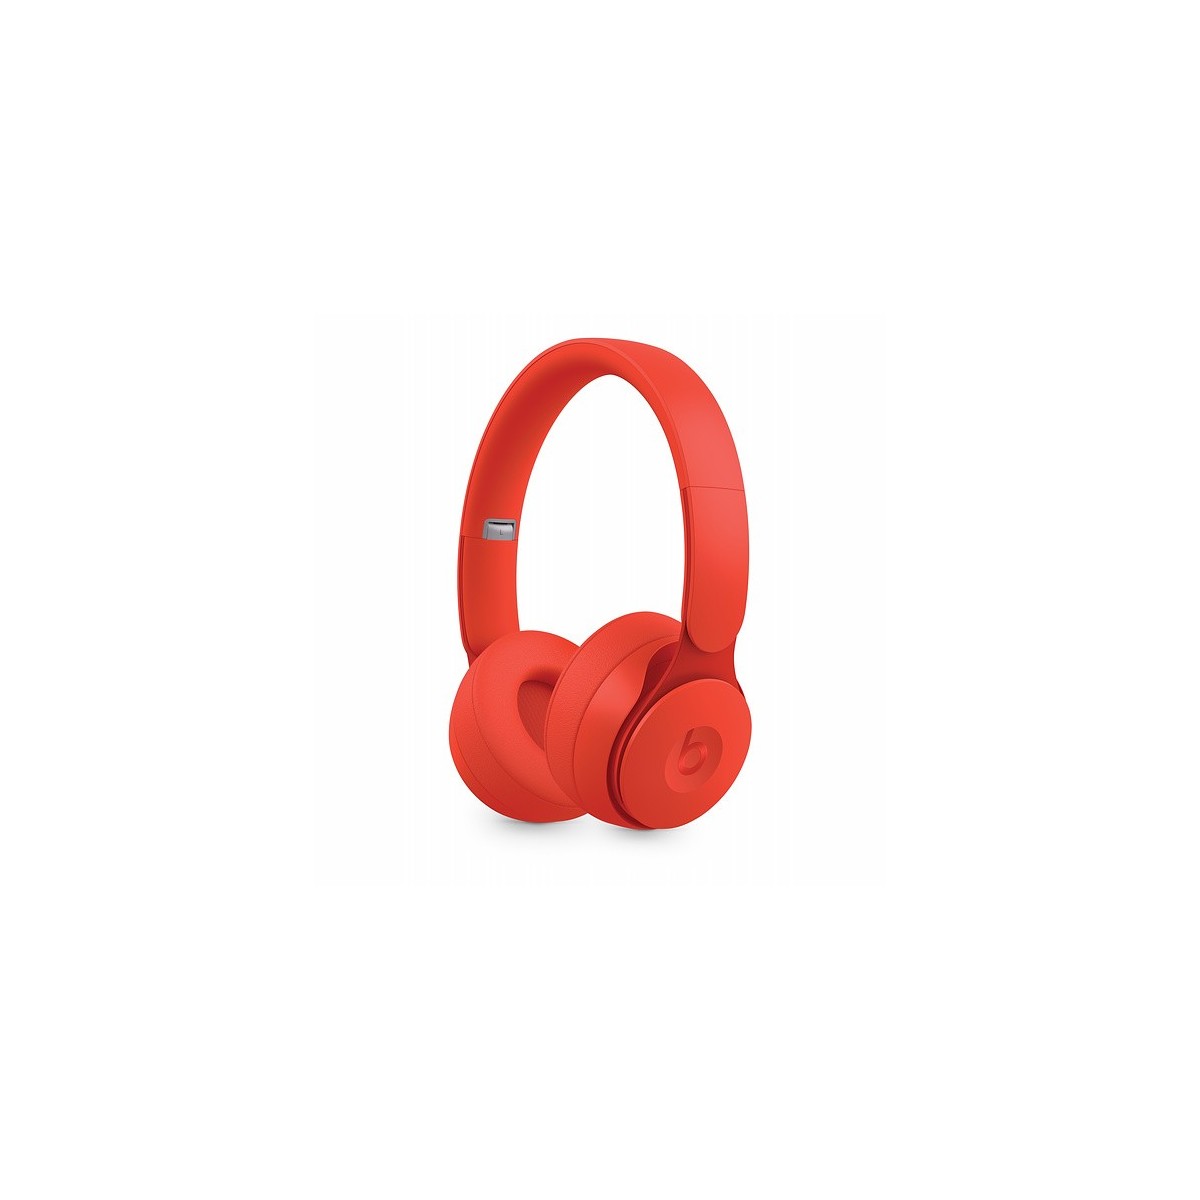 Apple Solo Pro - Headphones - Head-band - Calls  Music - Red - Binaural - iPhone Models iPhone 11 Pro iPhone 11 Pro Max iPhone 1